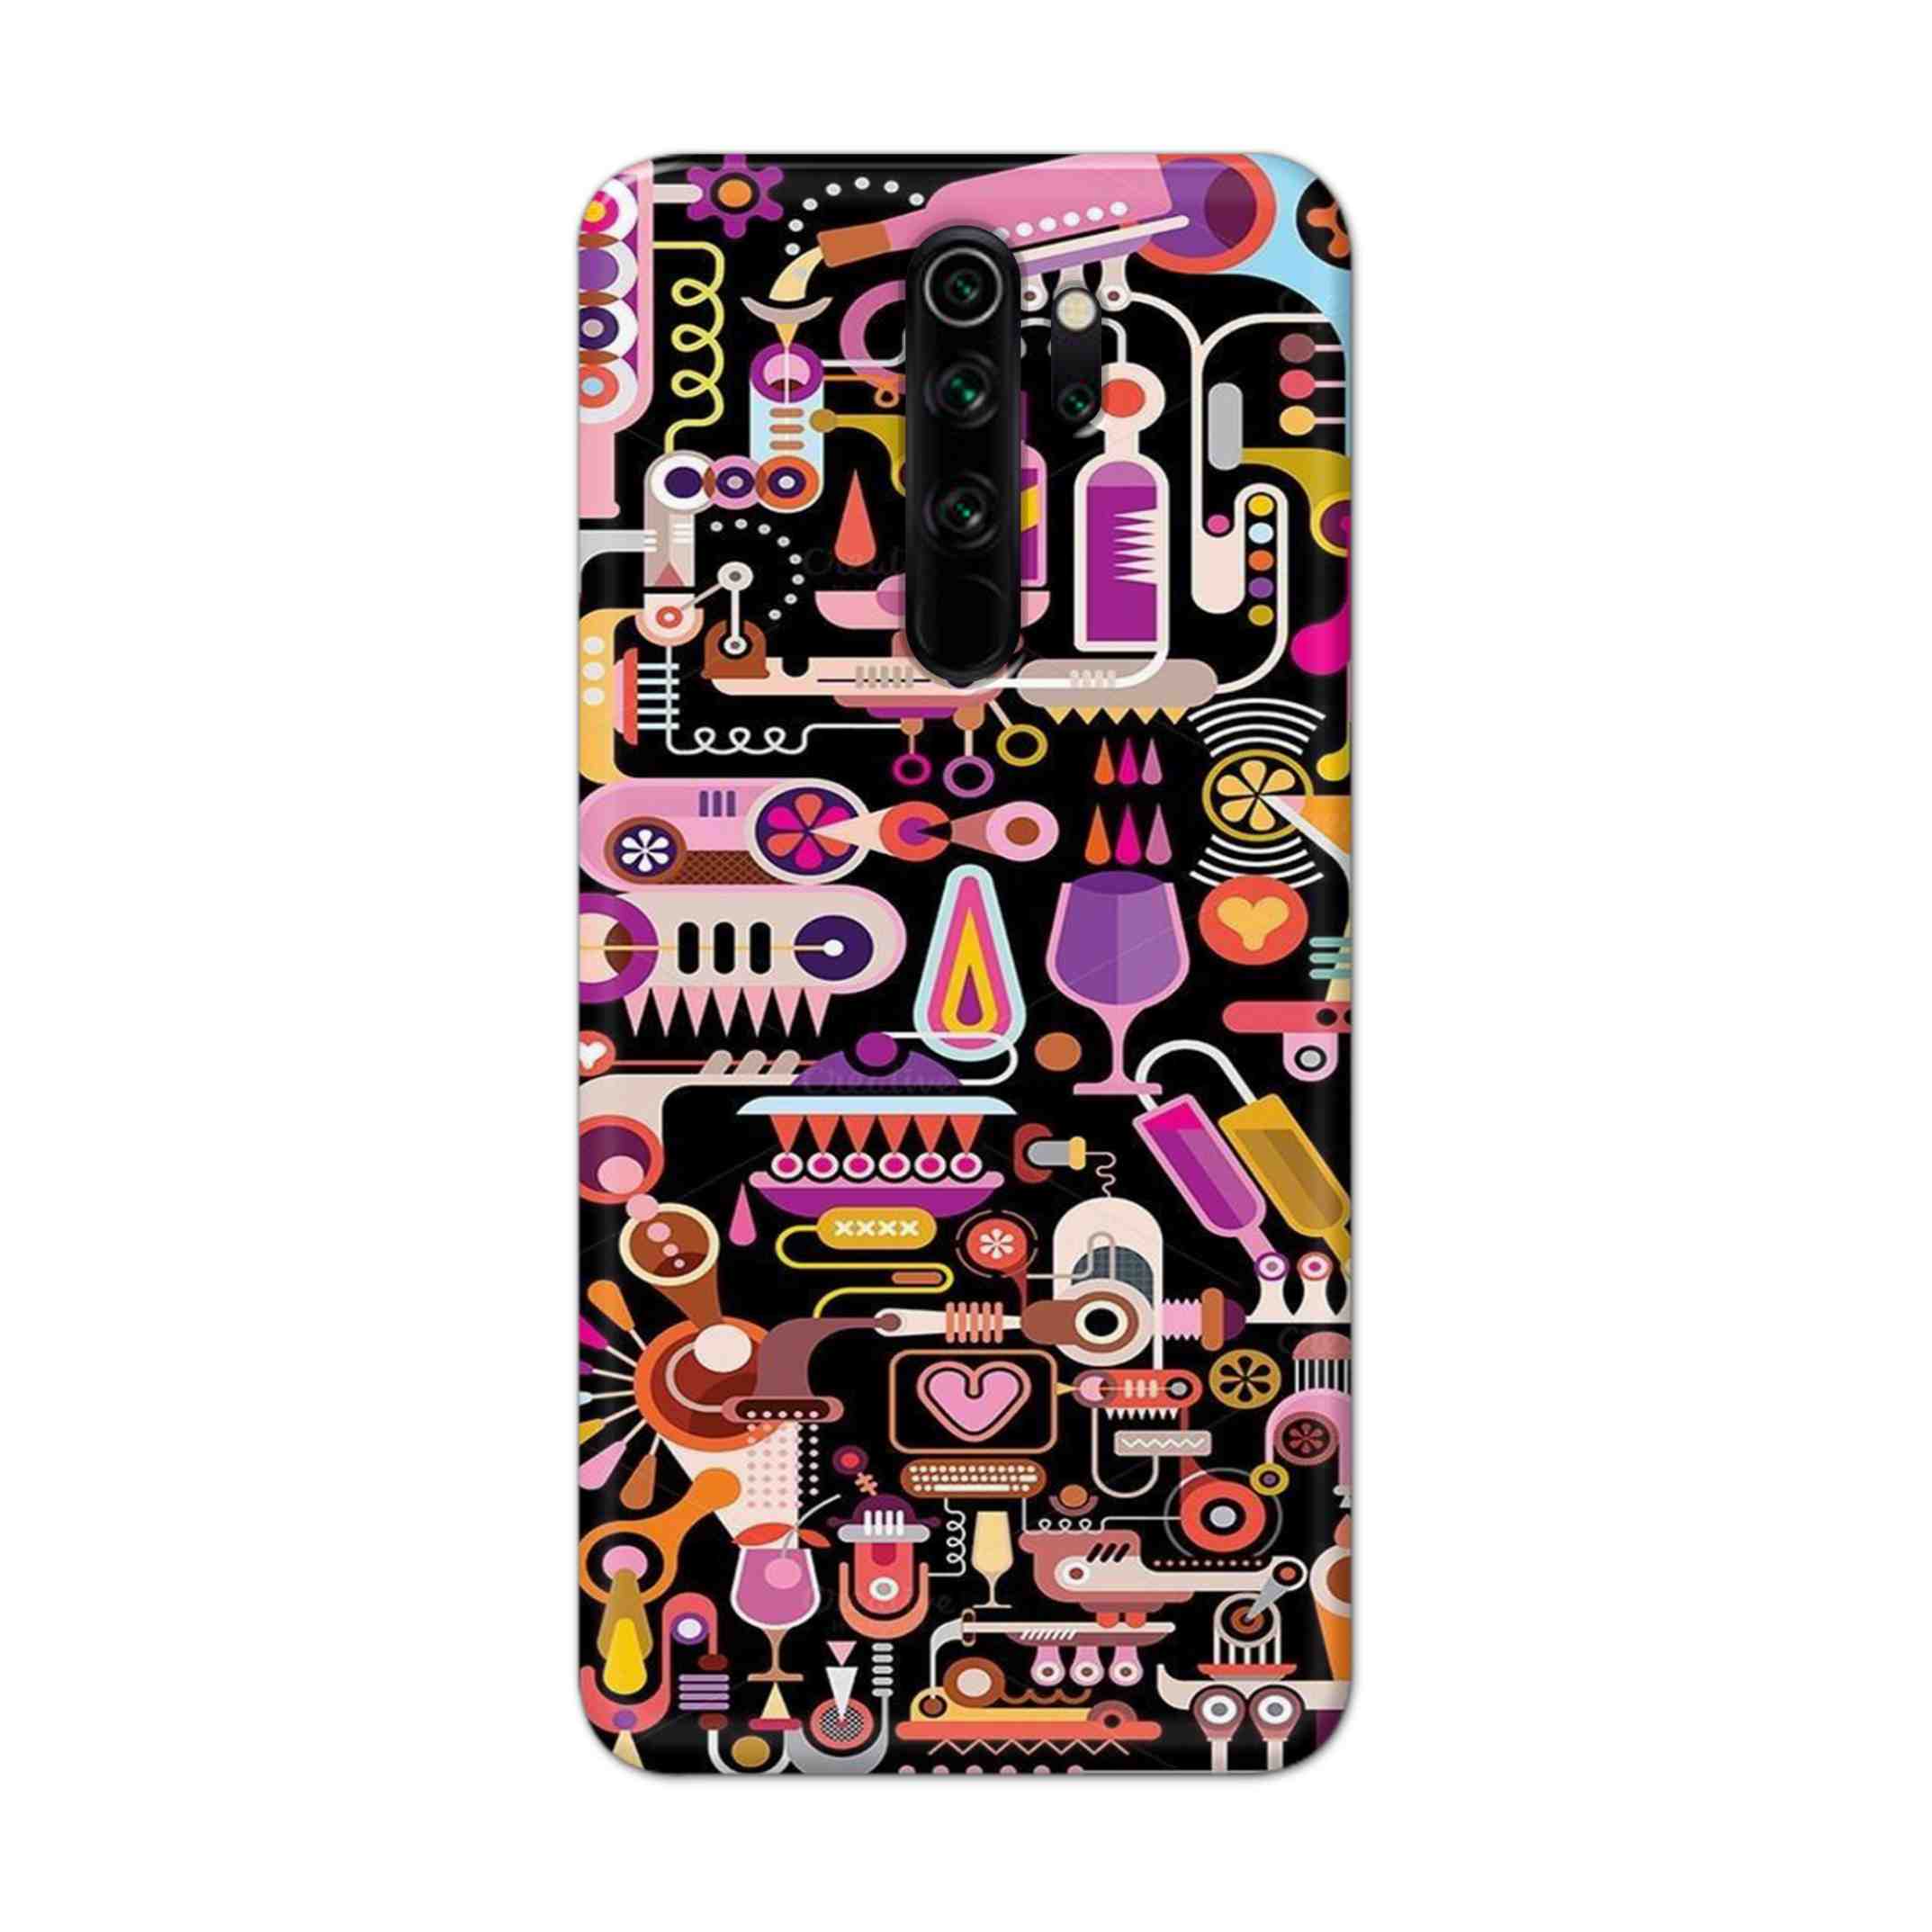 Buy Lab Art Hard Back Mobile Phone Case Cover For Xiaomi Redmi Note 8 Pro Online